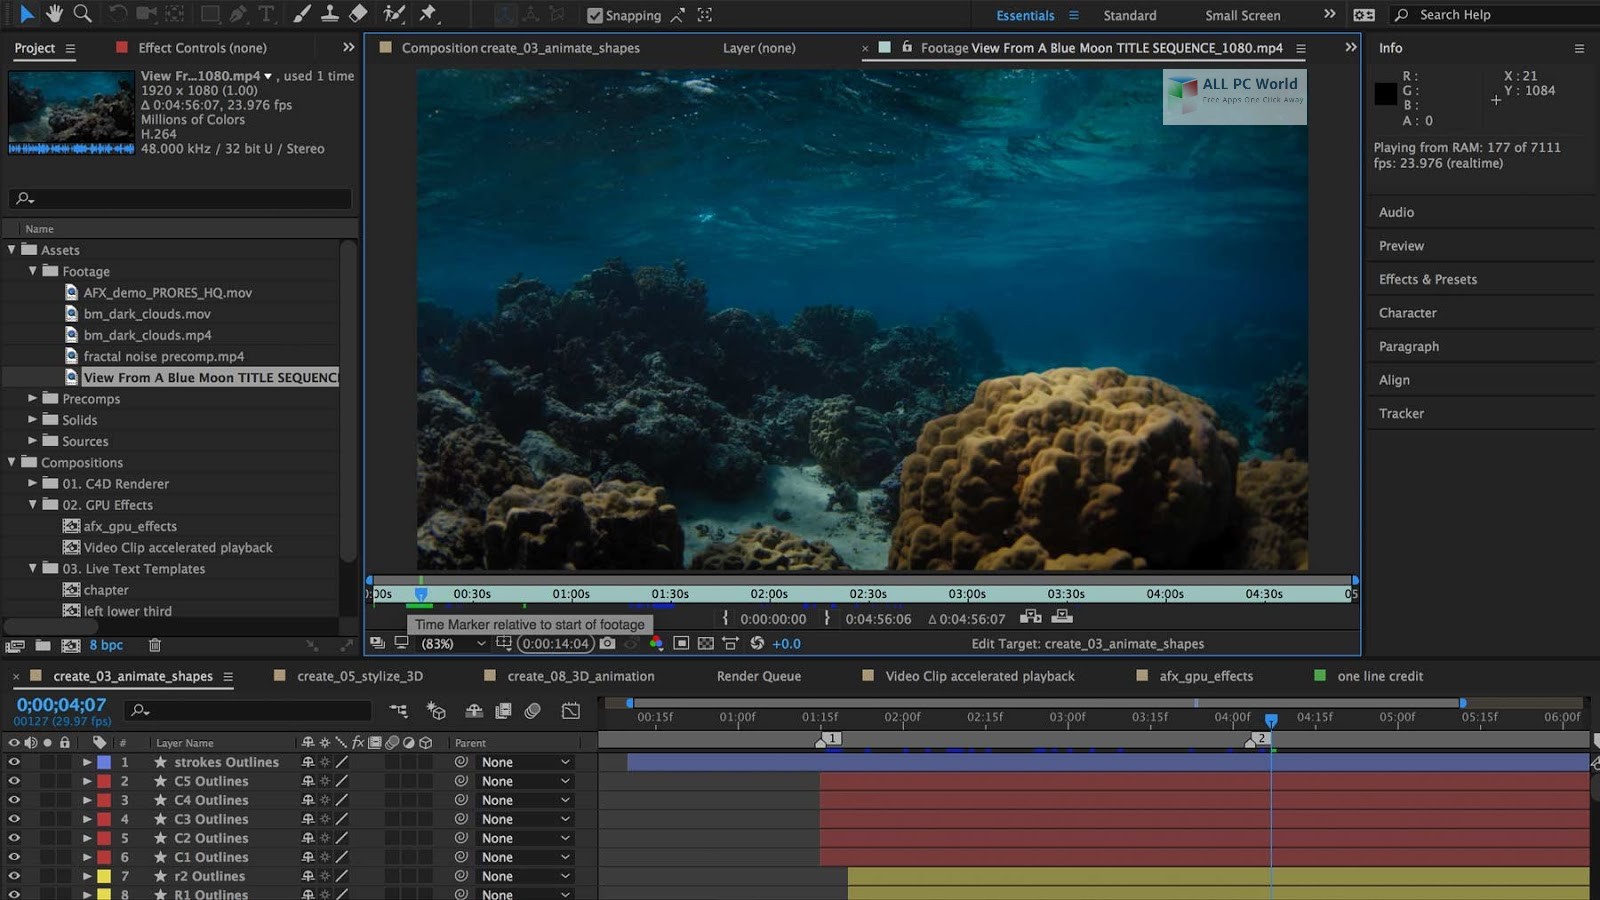 Adobe After Effects CC 2019 v16.1